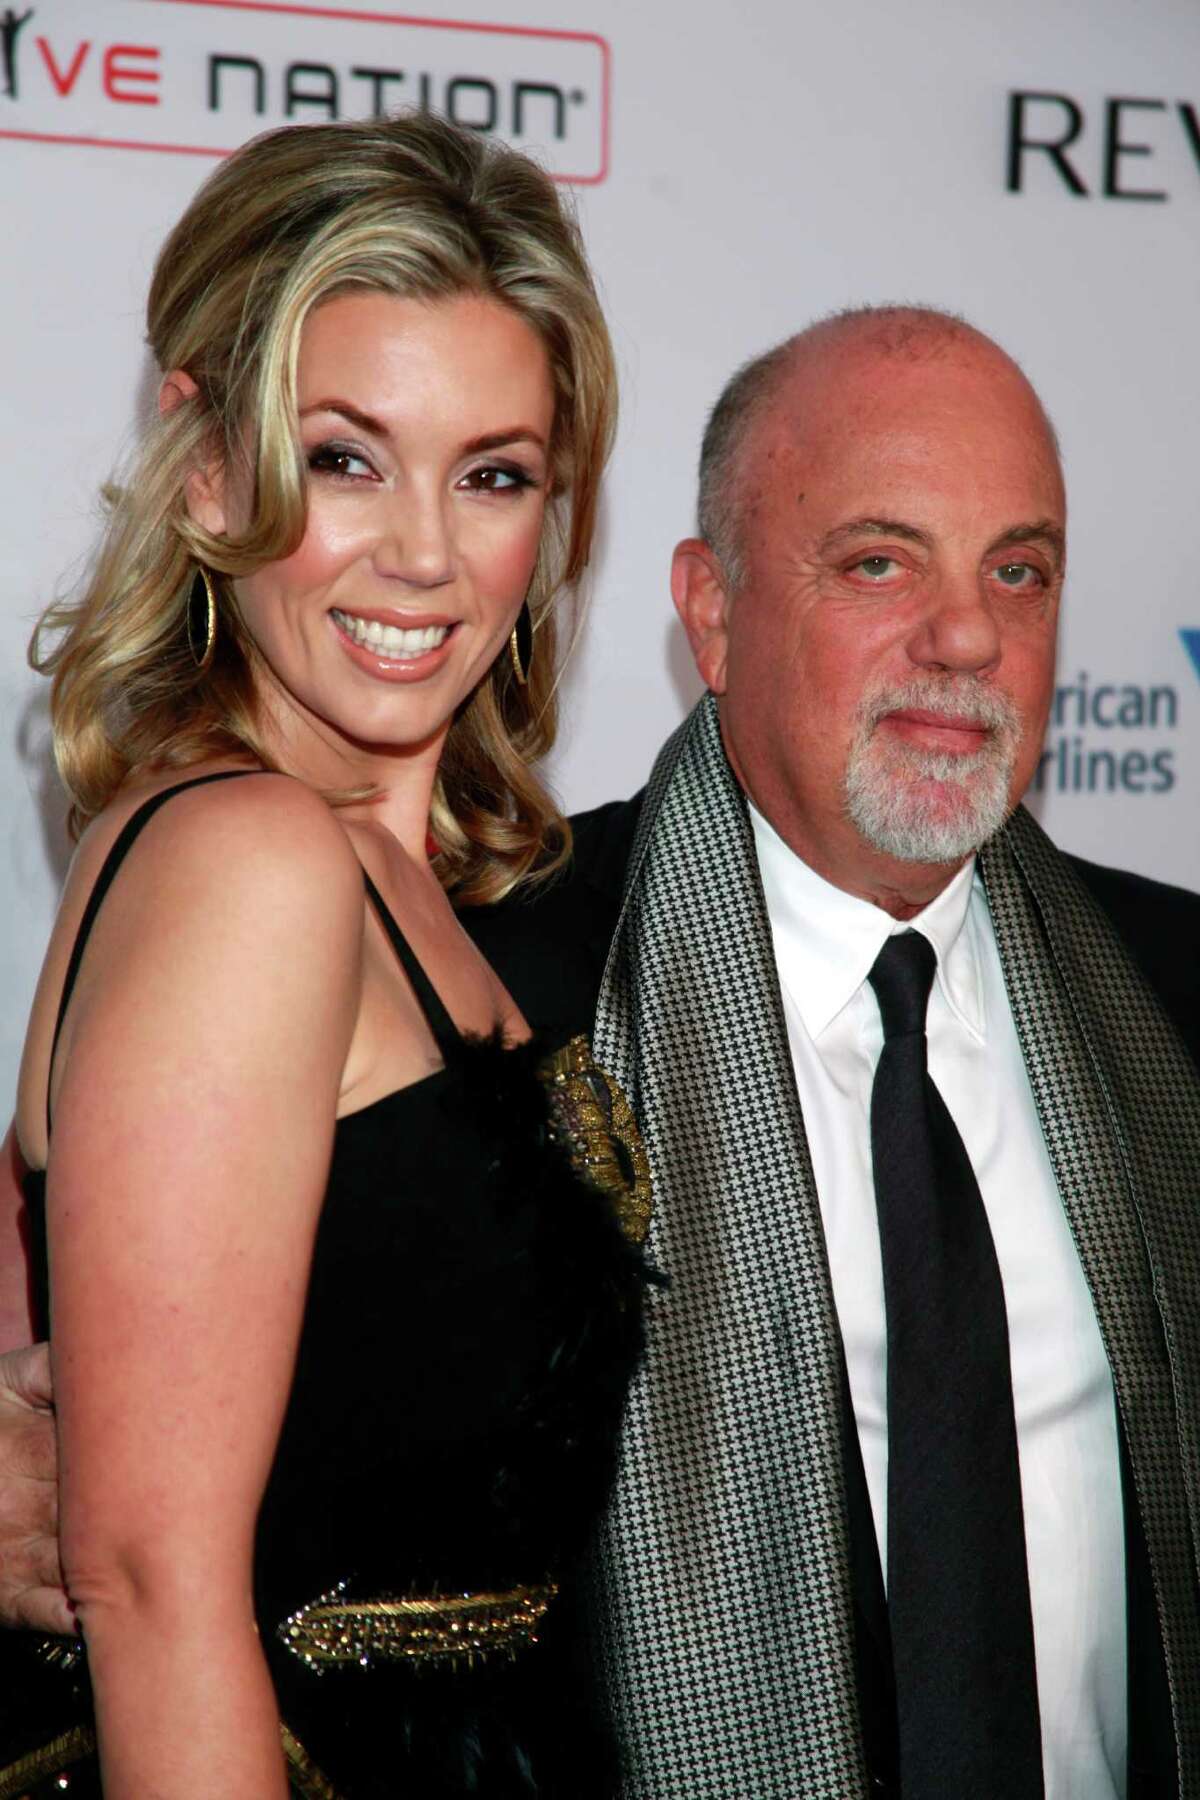 FILE - In this Oct. 15, 2013 file photo, Alexis Roderick, left, and Billy Joel arrive at the Elton John AIDS Foundation's 12th Annual "An Enduring Vision" benefit gala in New York. Joel married girlfriend Alexis Roderick in a surprise ceremony at the couple?’s annual July 4 party. The singer?’s spokeswoman Claire Mercuri says New York Gov. Andre Cuomo presided over Saturday?’s nuptials at Joel?’s Long Island estate. (Photo by Carlo Allegri/Invision/AP, File) ORG XMIT: NYET601